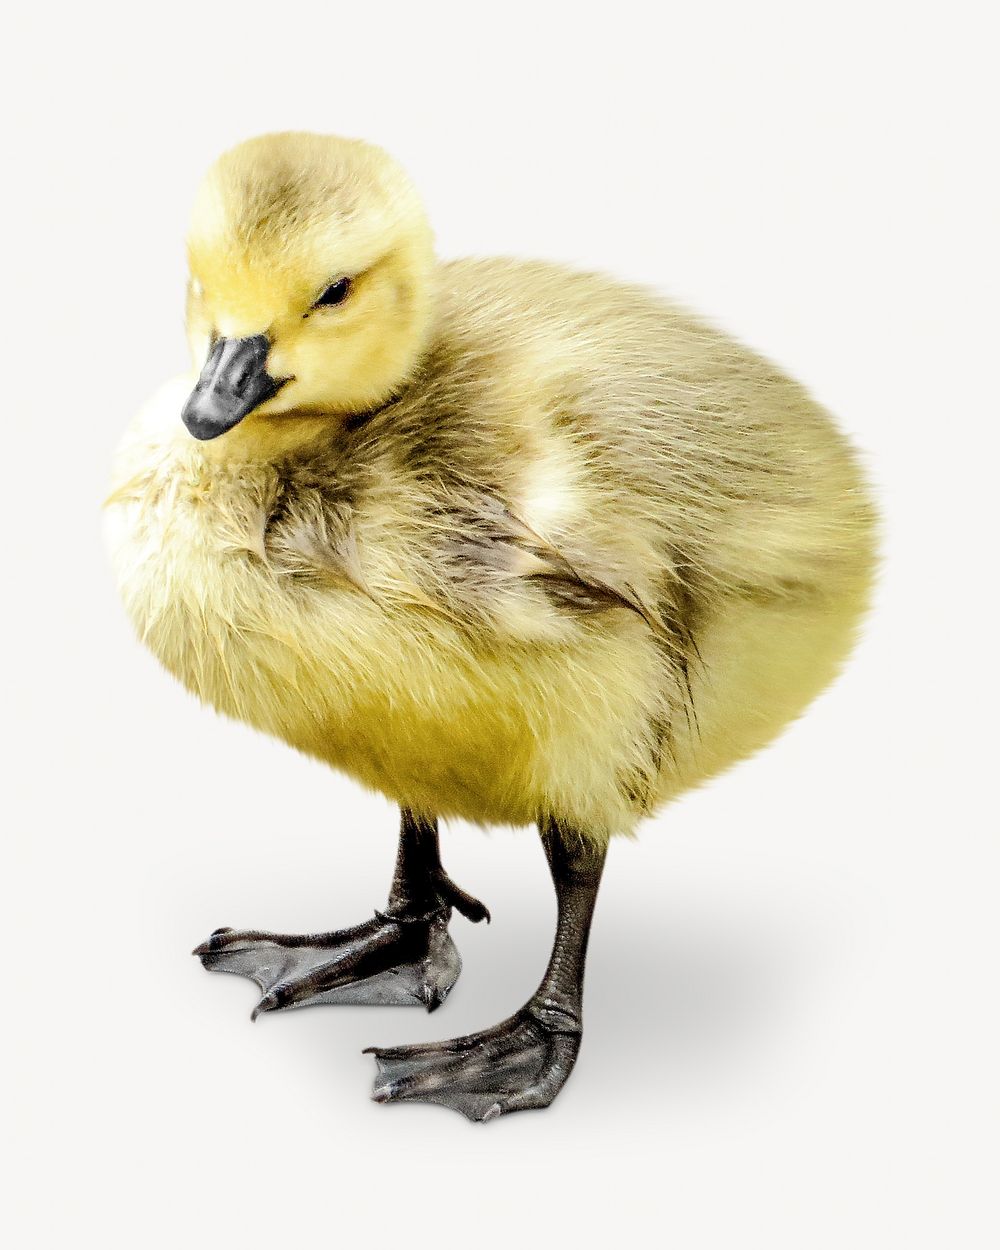 Duckling image on white